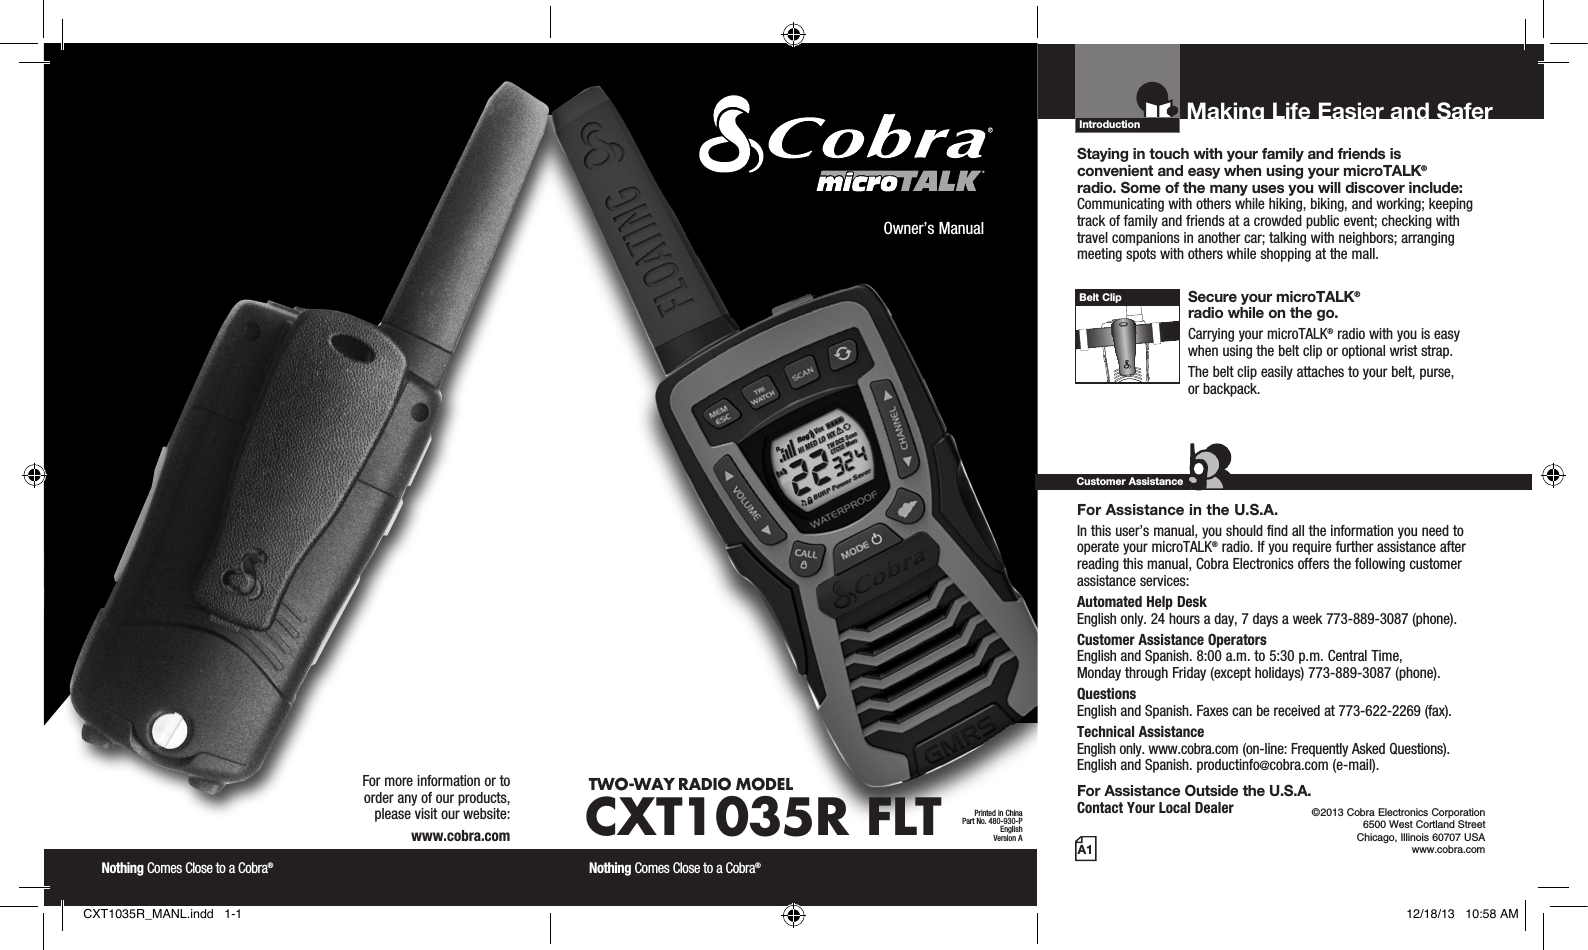 Introduction©2013 Cobra Electronics Corporation 6500 West Cortland Street Chicago, Illinois 60707 USAwww.cobra.comMaking Life Easier and Safer Staying in touch with your family and friends is  convenient and easy when using your microTALK®  radio. Some of the many uses you will discover include:Communicating with others while hiking, biking, and working; keeping track of family and friends at a crowded public event; checking with travel companions in another car; talking with neighbors; arranging meeting spots with others while shopping at the mall. Secure your microTALK®  radio while on the go.Carrying your microTALK® radio with you is easy when using the belt clip or optional wrist strap. The belt clip easily attaches to your belt, purse,  or backpack.For Assistance in the U.S.A. In this user’s manual, you should find all the information you need to operate your microTALK® radio. If you require further assistance after reading this manual, Cobra Electronics offers the following customer assistance services:Automated Help Desk  English only. 24 hours a day, 7 days a week 773-889-3087 (phone). Customer Assistance Operators  English and Spanish. 8:00 a.m. to 5:30 p.m. Central Time,  Monday through Friday (except holidays) 773-889-3087 (phone). Questions  English and Spanish. Faxes can be received at 773-622-2269 (fax). Technical Assistance  English only. www.cobra.com (on-line: Frequently Asked Questions).  English and Spanish. productinfo@cobra.com (e-mail).For Assistance Outside the U.S.A. Contact Your Local DealerCustomer AssistanceA1Owner’s ManualNothing Comes Close to a Cobra® Nothing Comes Close to a Cobra® For more information or to  order any of our products,  please visit our website:www.cobra.comBelt ClipPrinted in ChinaPart No. 480-930-PEnglishVersion ATWO-WAY RADIO  MODEL CXT1035R FLTCXT1035R_MANL.indd   1-1 12/18/13   10:58 AM